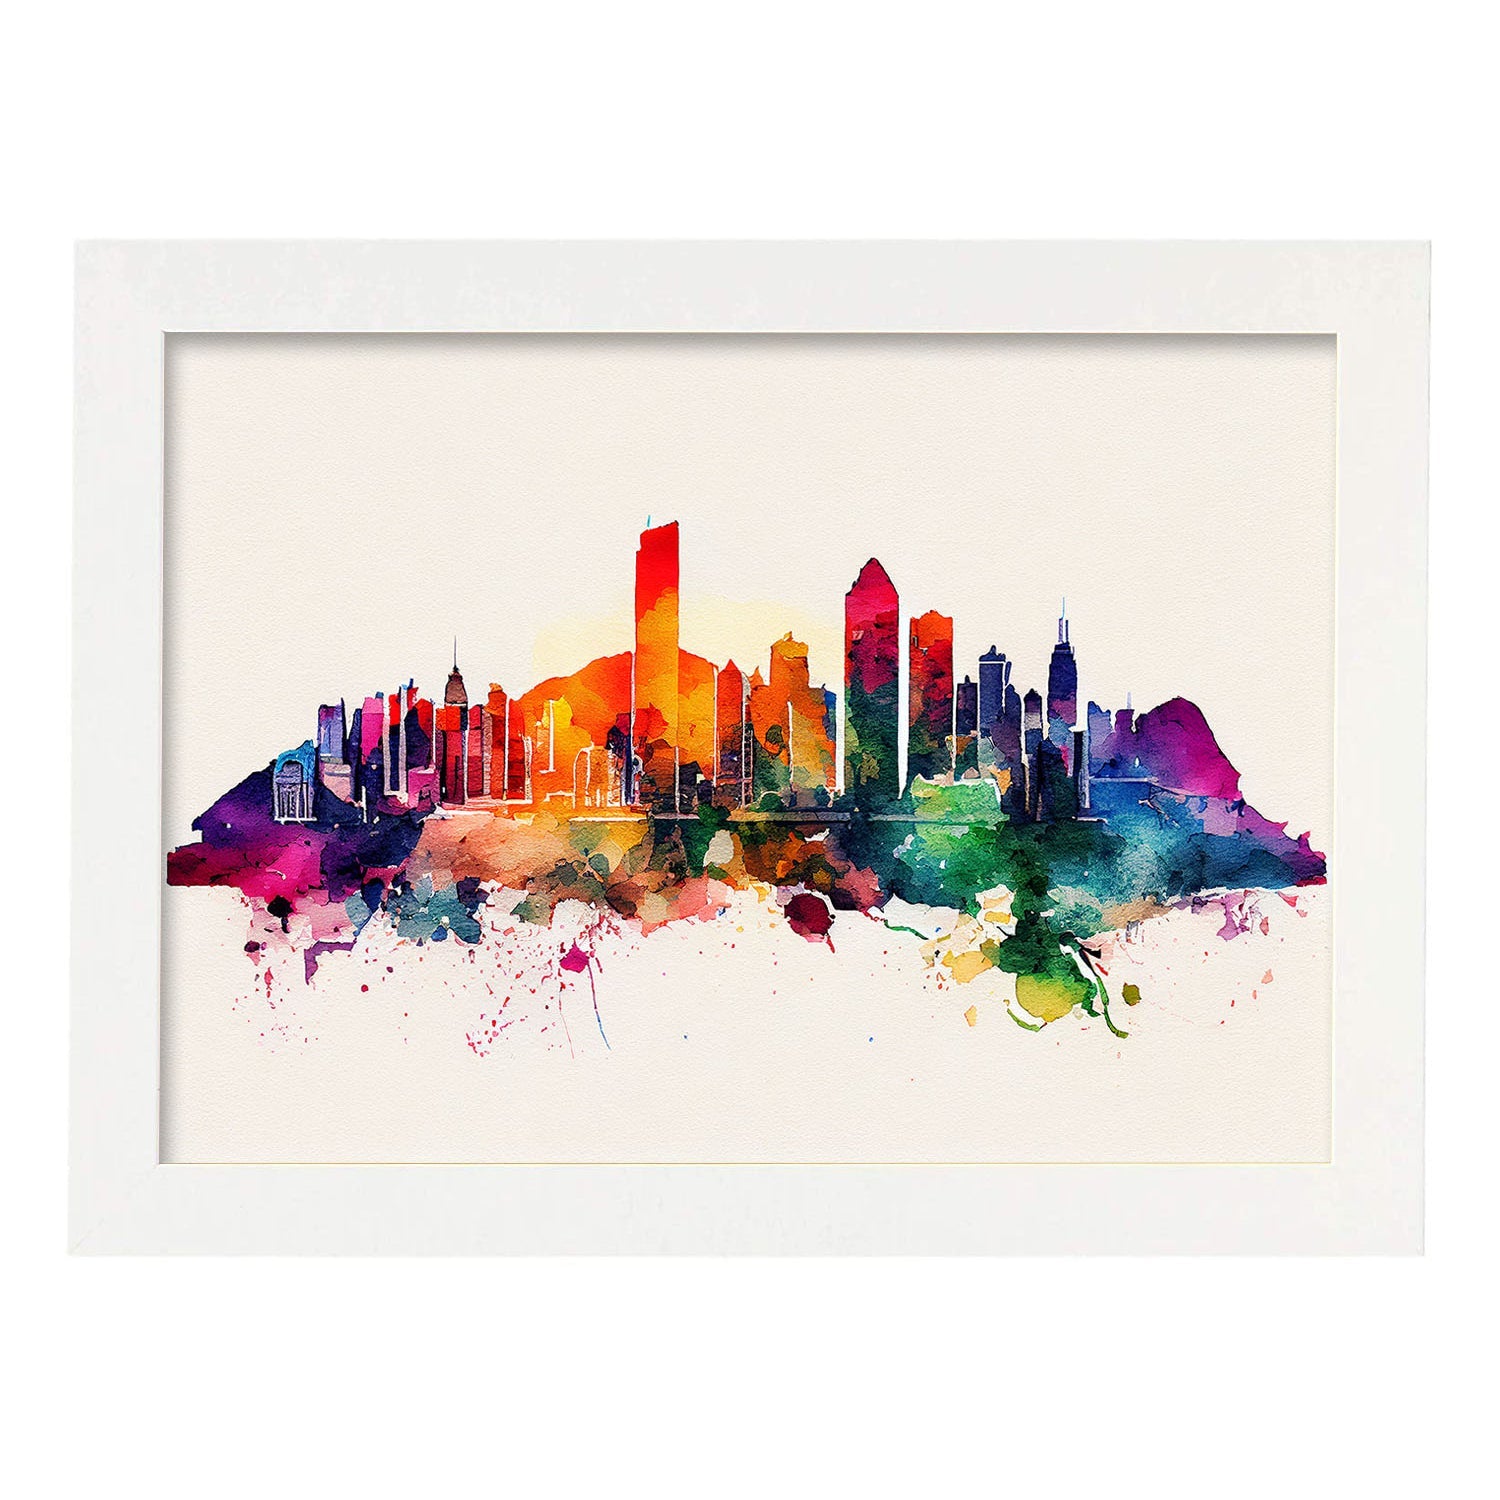 Nacnic watercolor of a skyline of the city of Hong Kong_2. Aesthetic Wall Art Prints for Bedroom or Living Room Design.-Artwork-Nacnic-A4-Marco Blanco-Nacnic Estudio SL